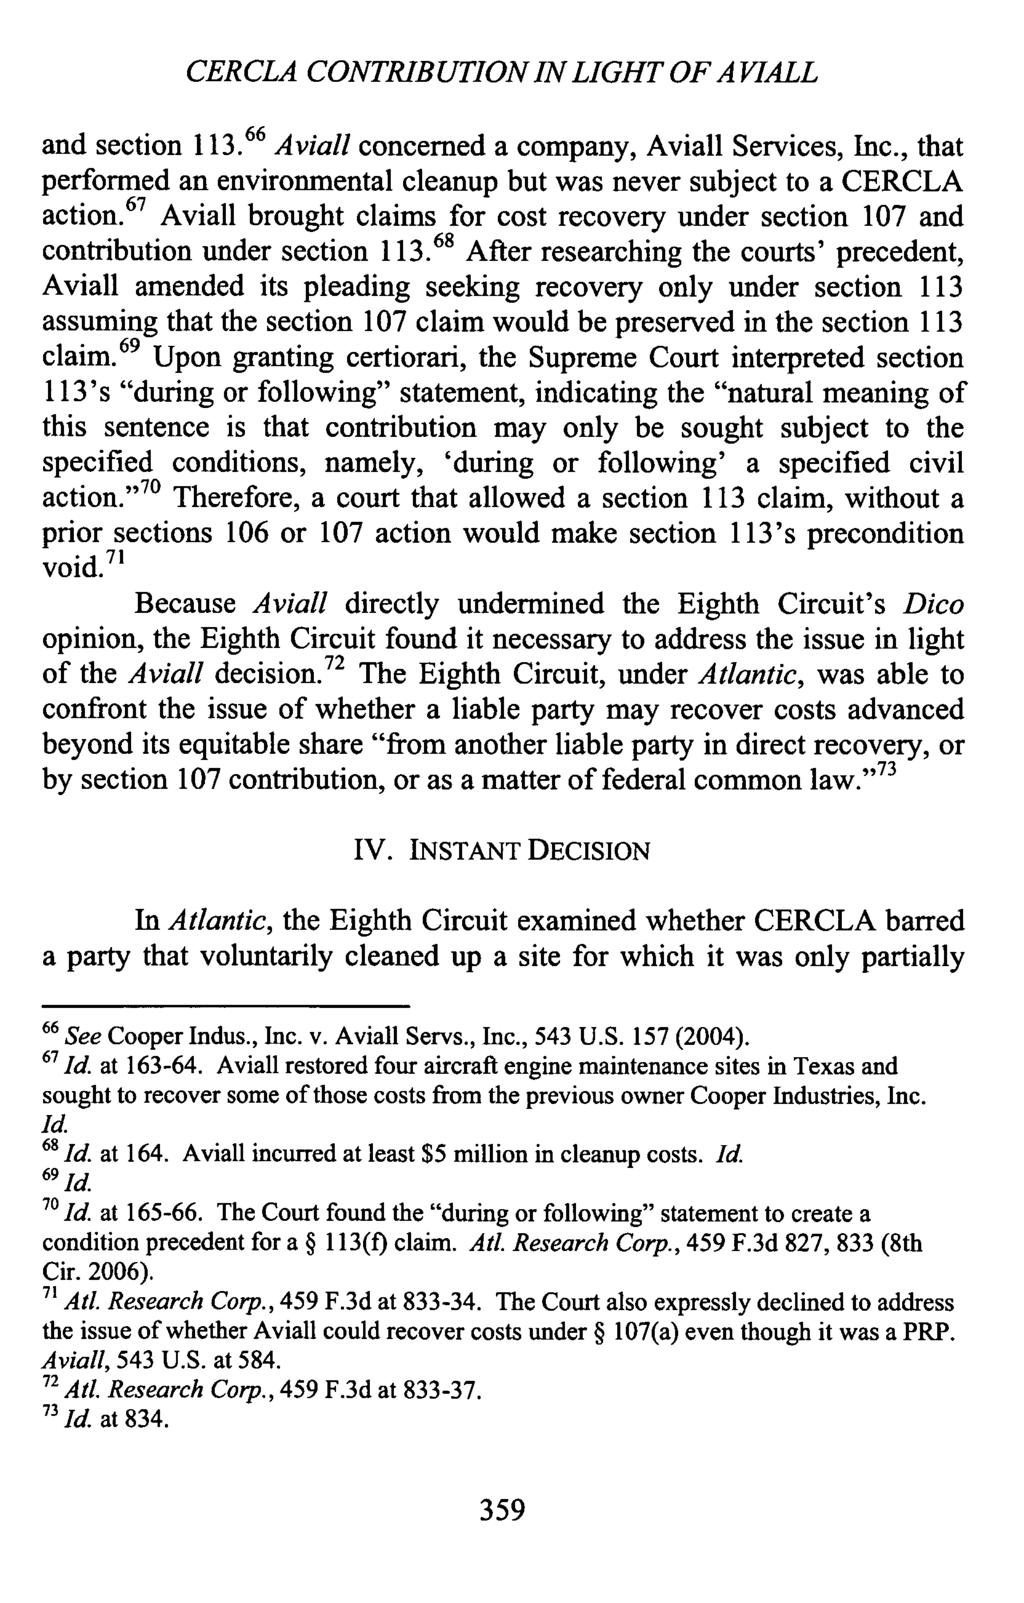 CERCLA CONTRIBUTION IN LIGHT OF A VIALL and section 113.66 Aviall concerned a company, Aviall Services, Inc., that performed an environmental cleanup but was never subject to a CERCLA action.